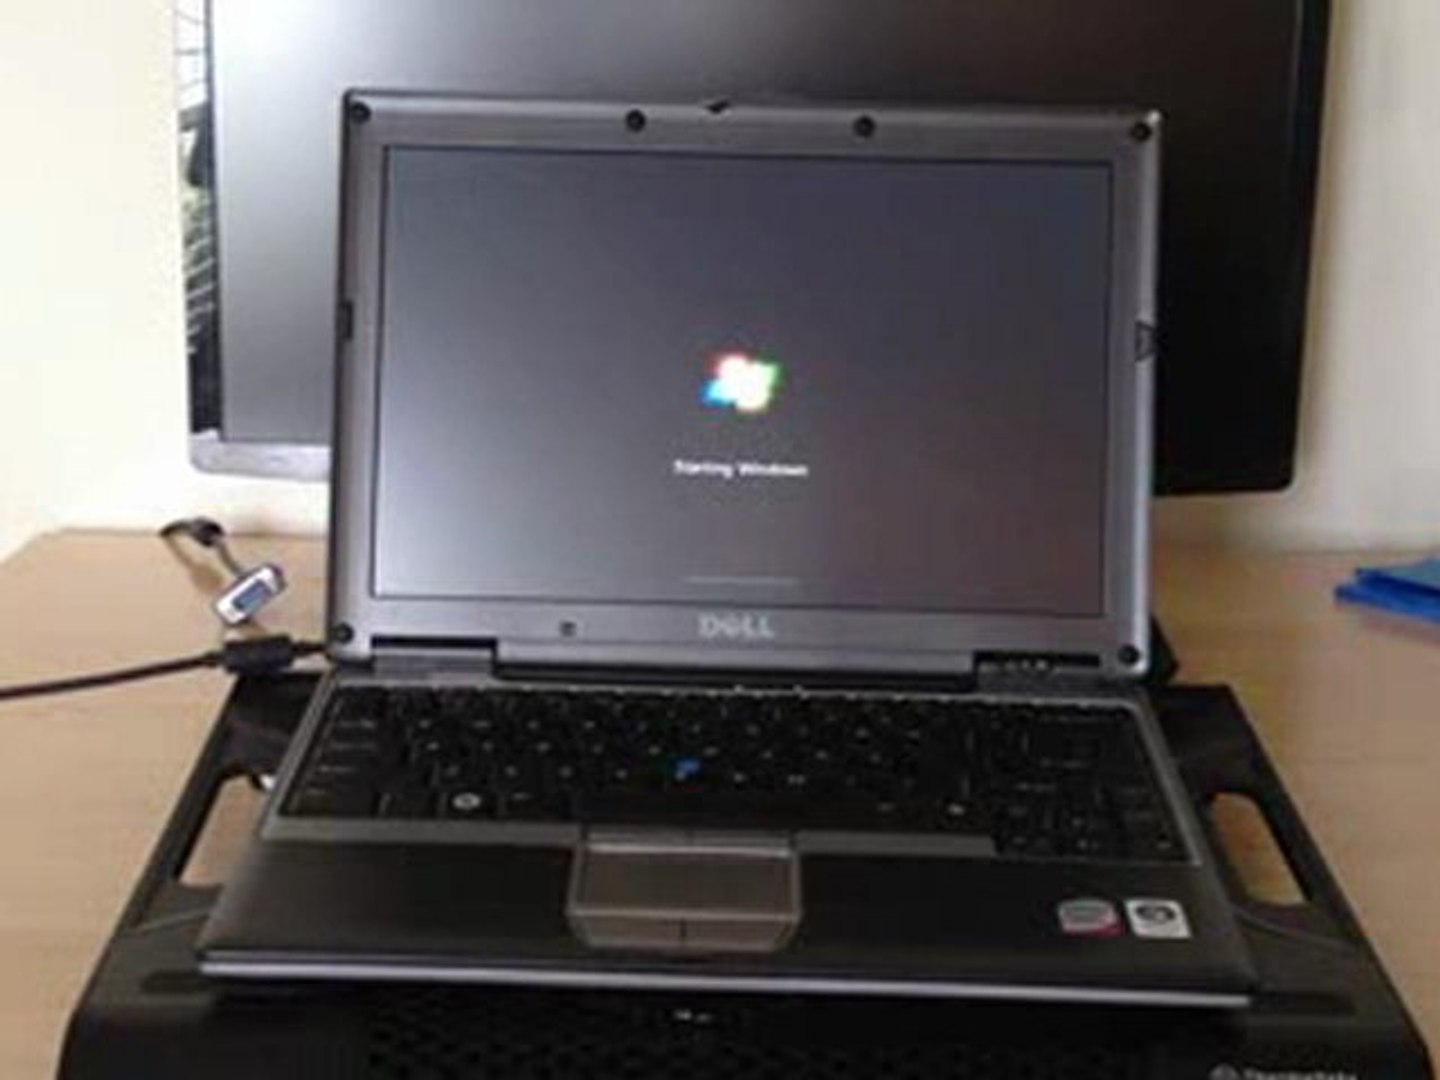 Dell Latitude D430 Intel Core 2 Duo U7700 1 33ghz Review Dell Latitude D430 Intel Core 2 Duo U7700 1 33ghz For Sale Video Dailymotion